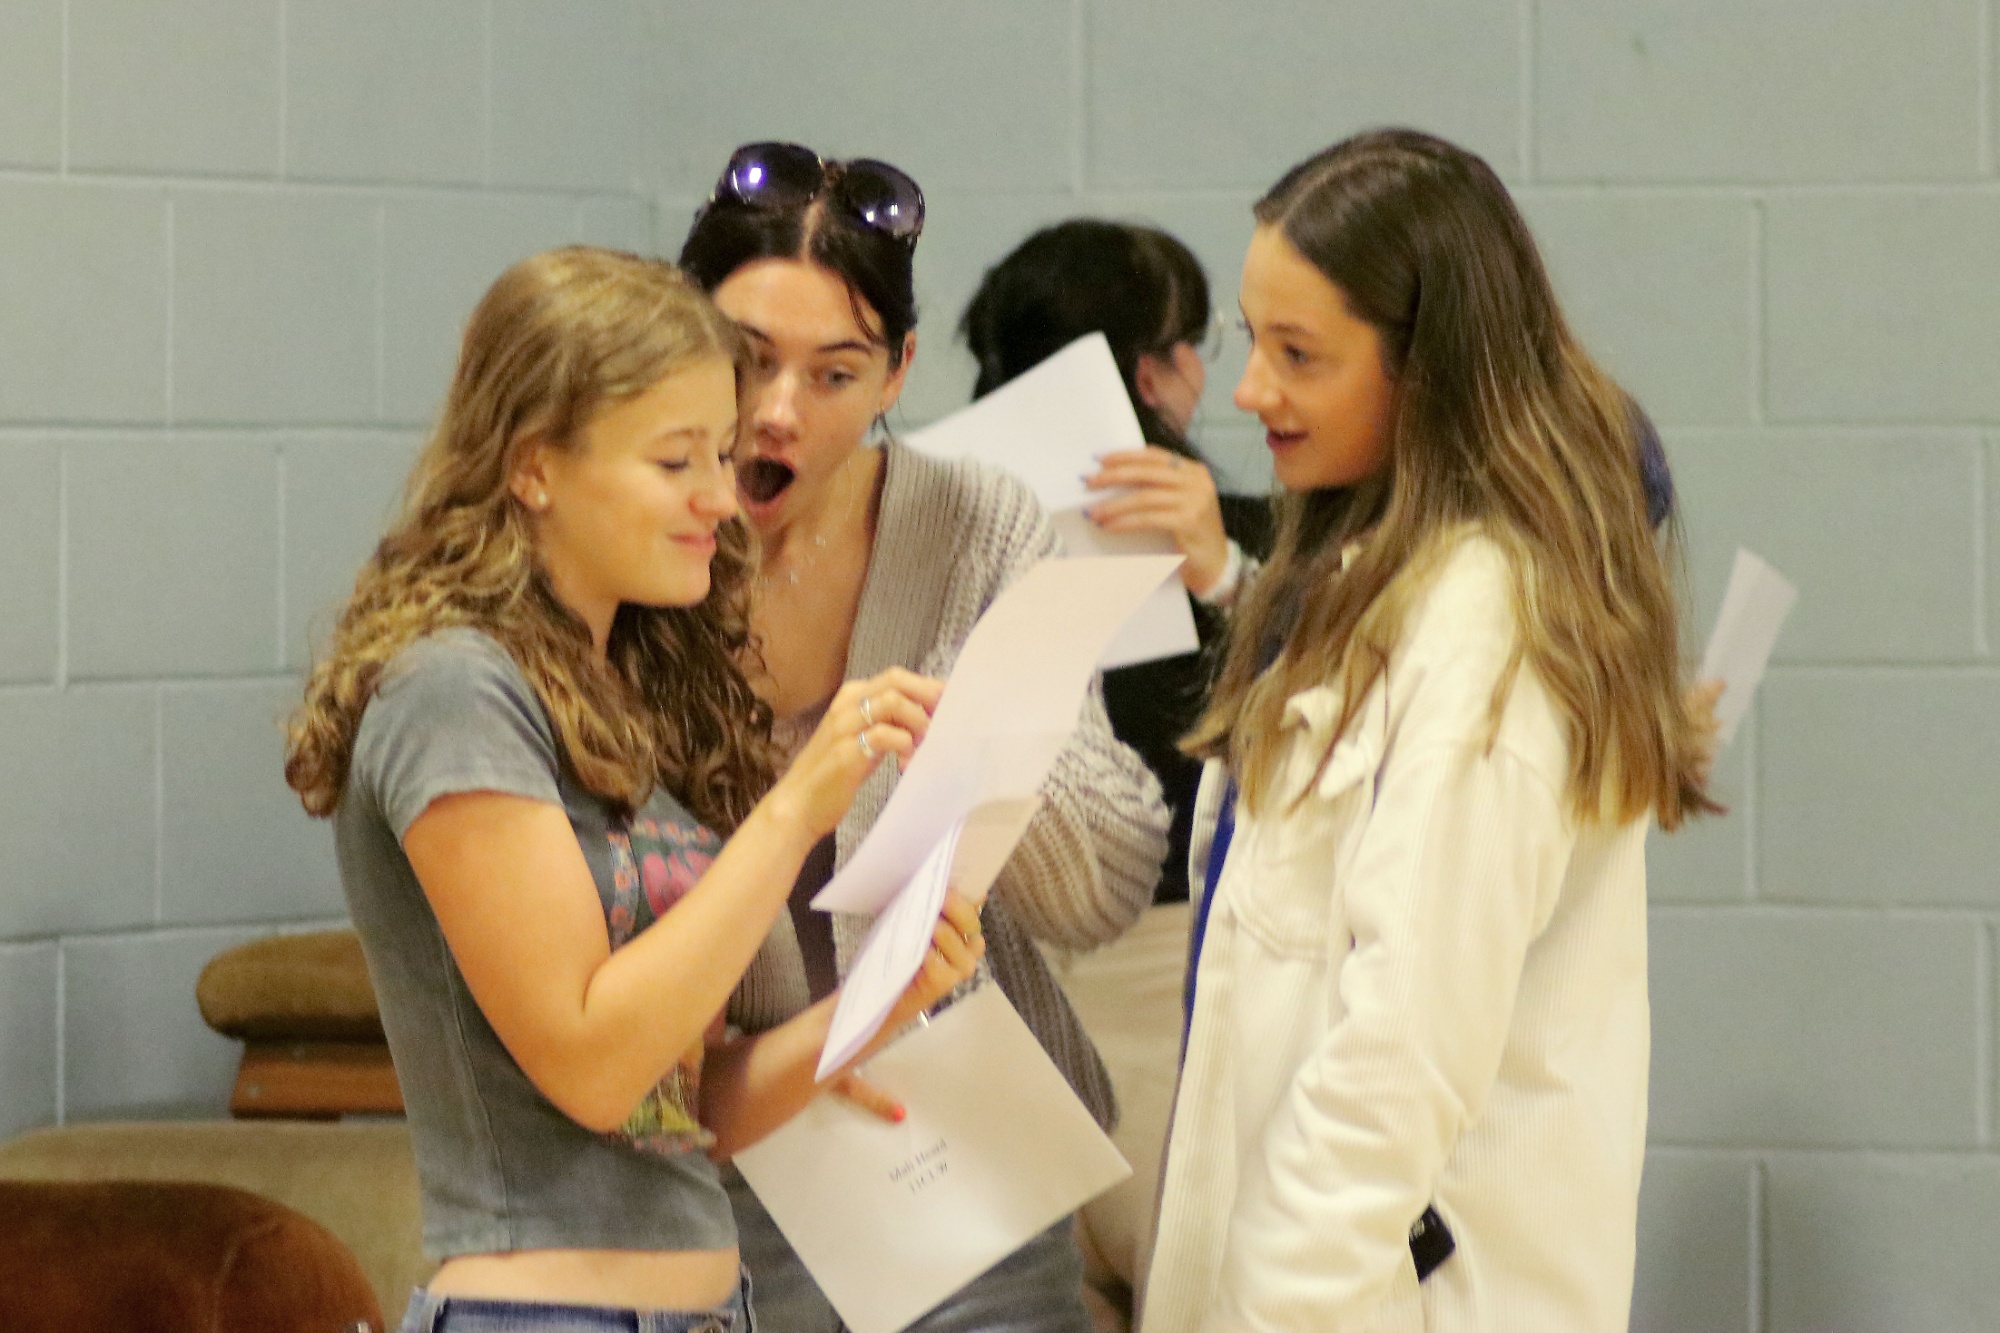 Plymouth High School for Girls - Exam results